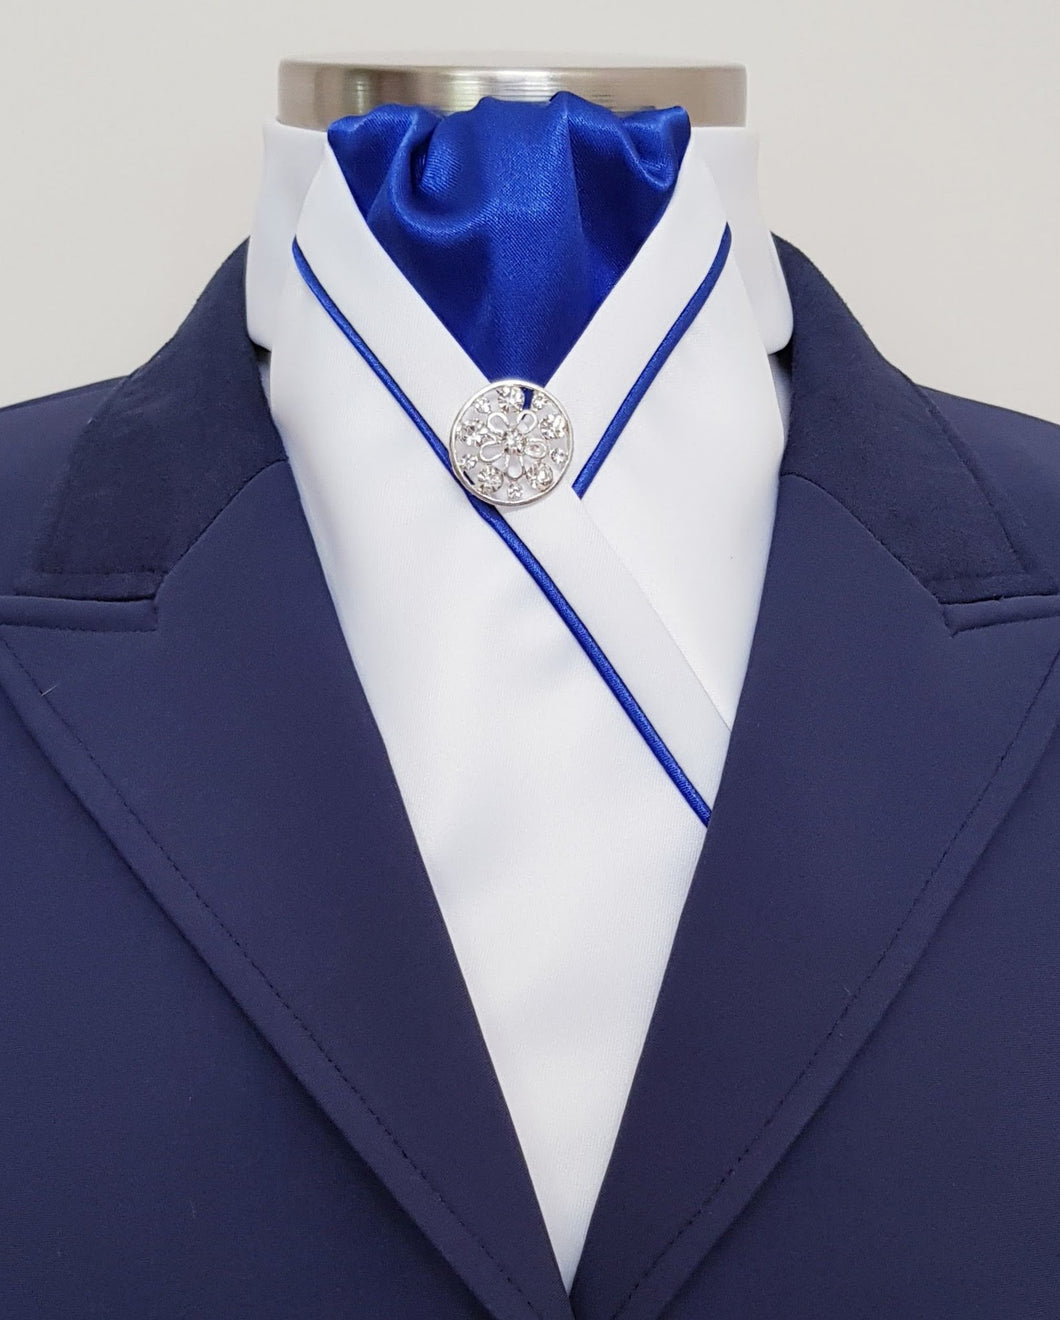 ERA KATE STOCK TIE - White satin, royal blue with matching piping and brooch